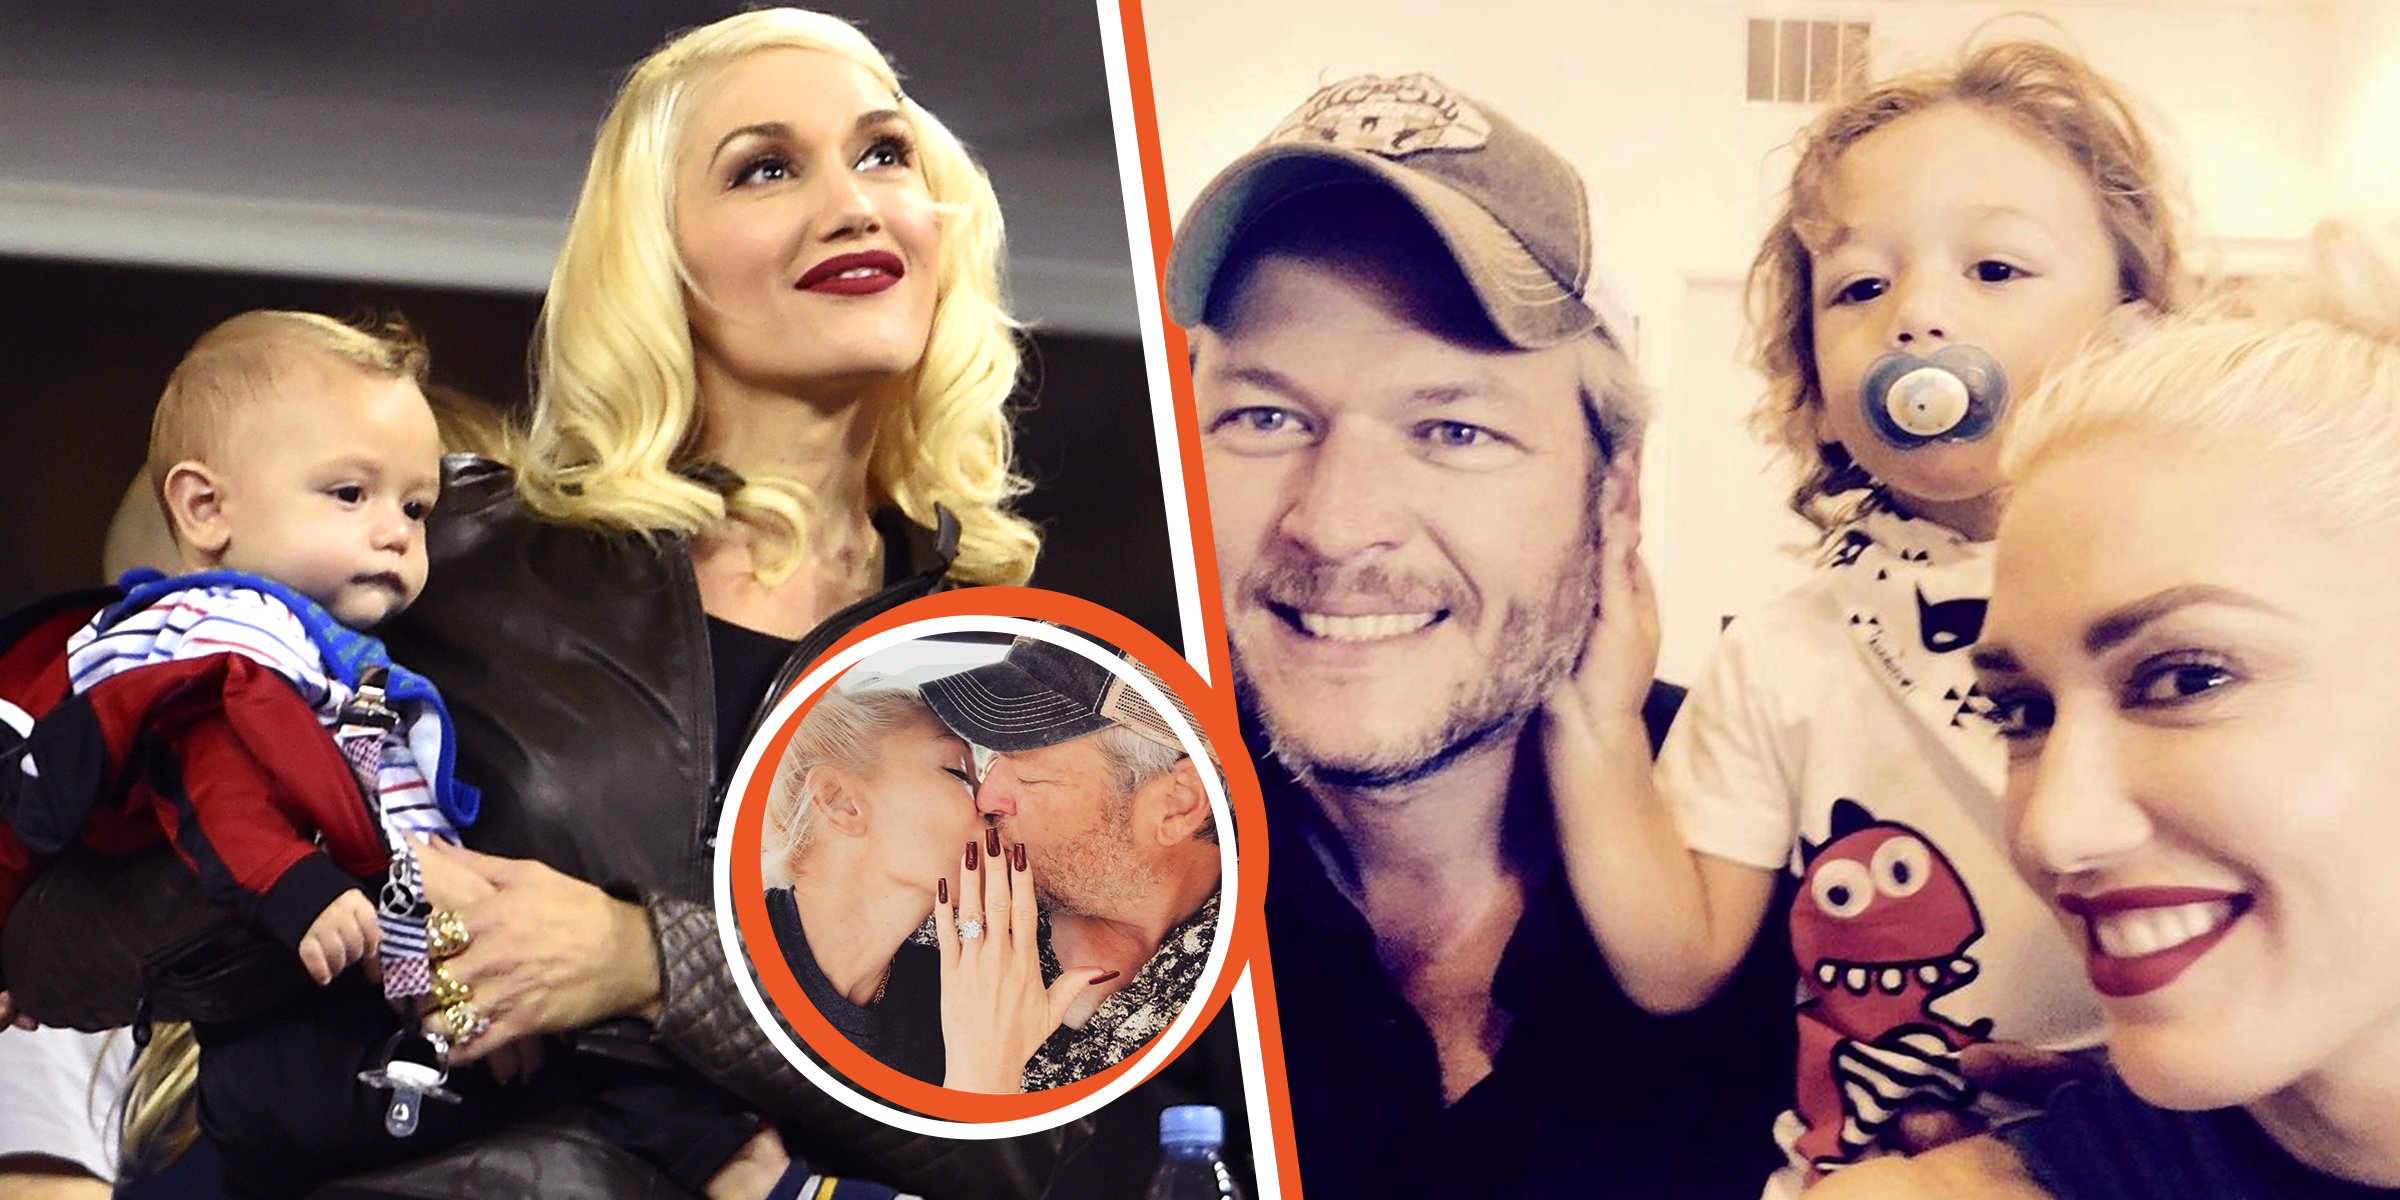 Apollo Bowie Rossdale and Gwen Stefani, 2014 | Gwen Stefani and Blake Shelton, 2021 |  Blake Shelton, Apollo Bowie Rossdale, Gwen Stefani, 2022 | Source: Instagram.com/gwenstefani | Getty Images